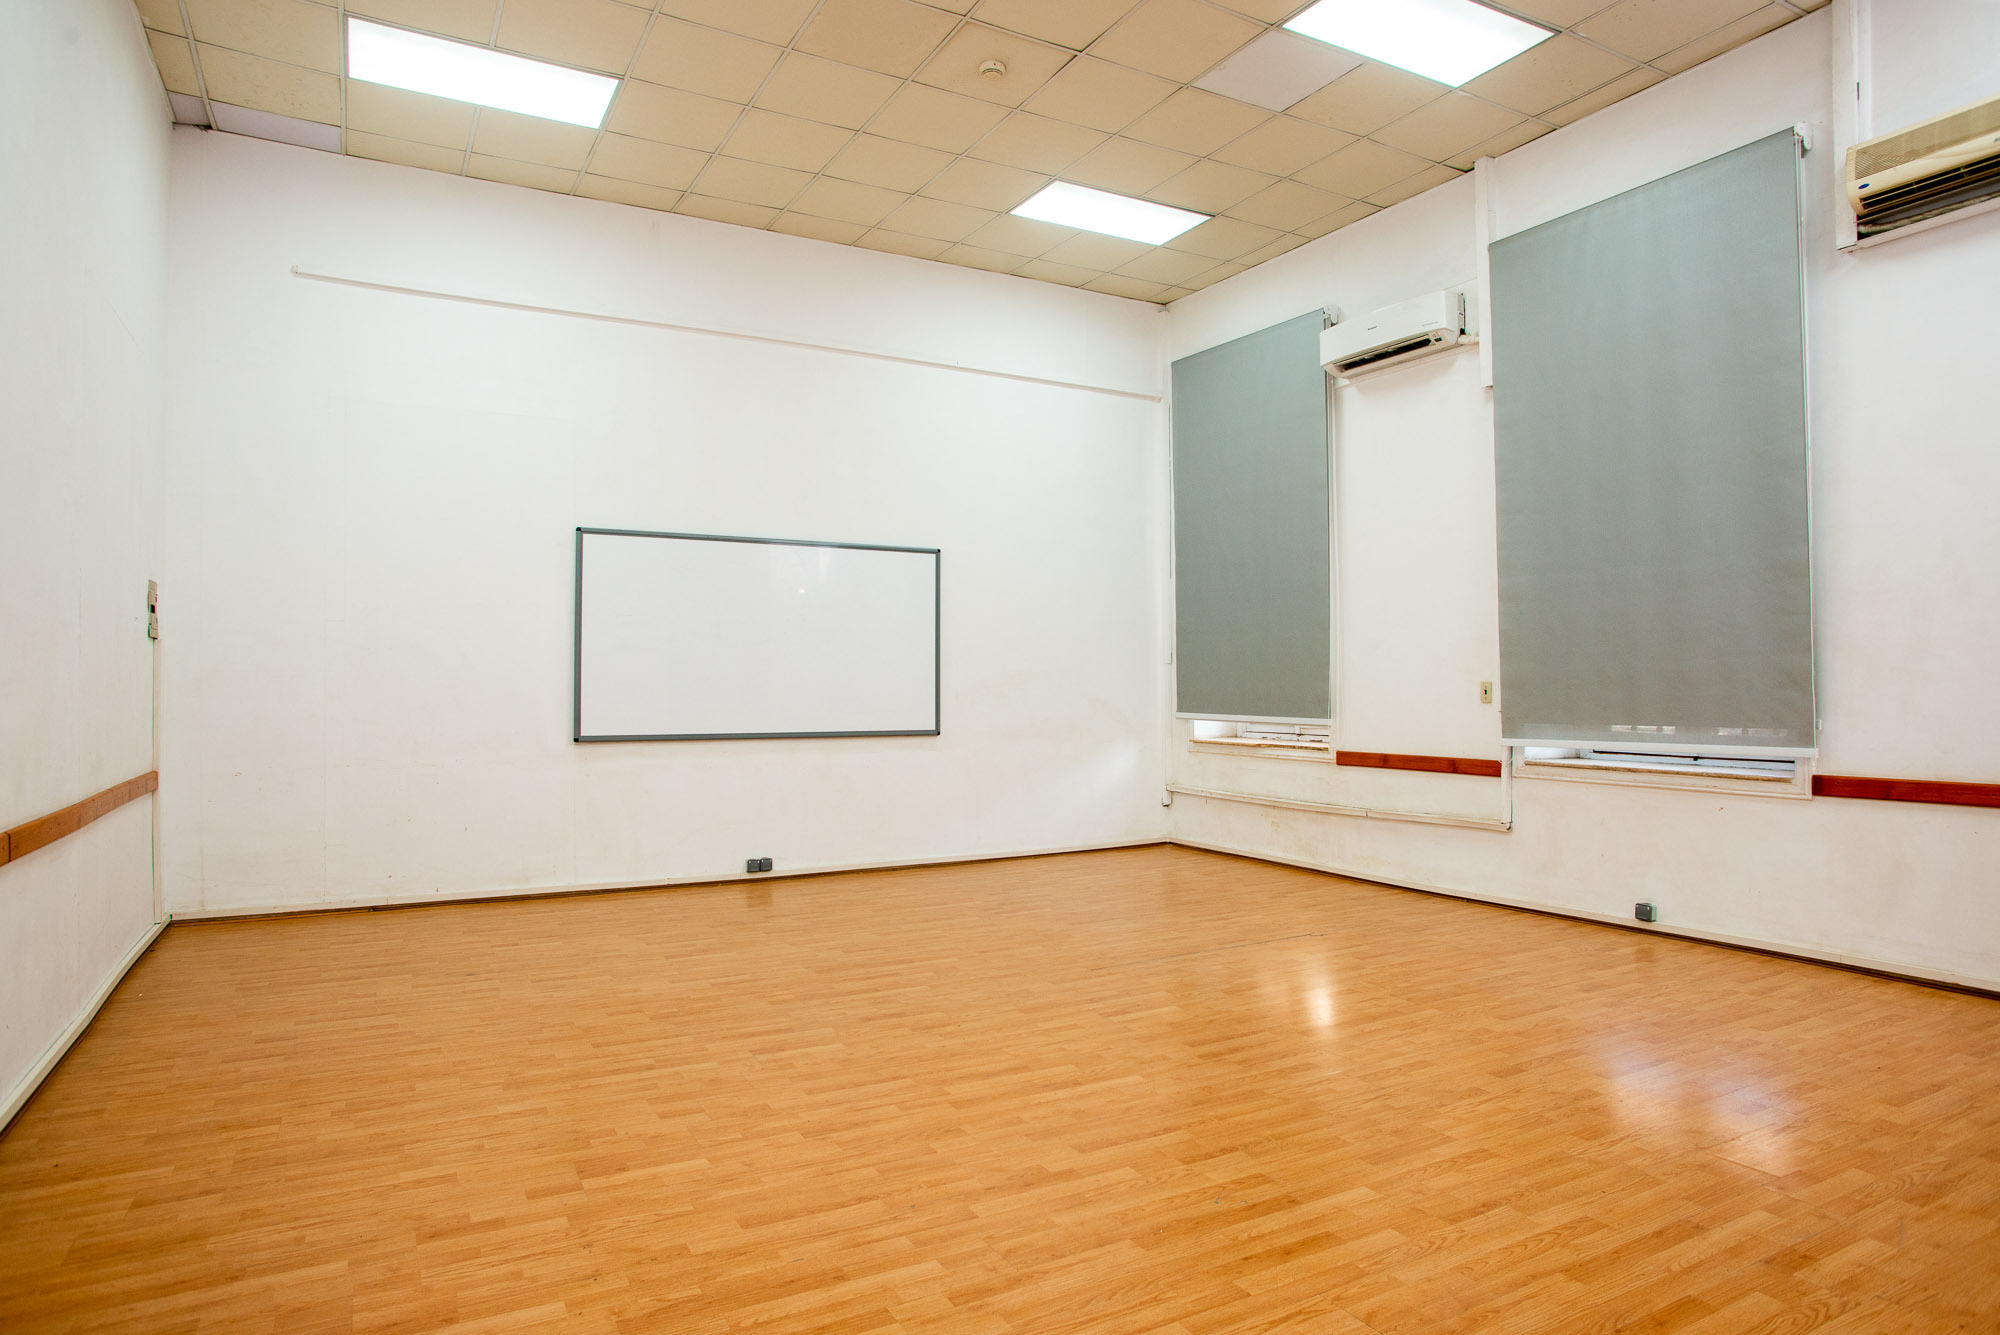 Empty room with a board 